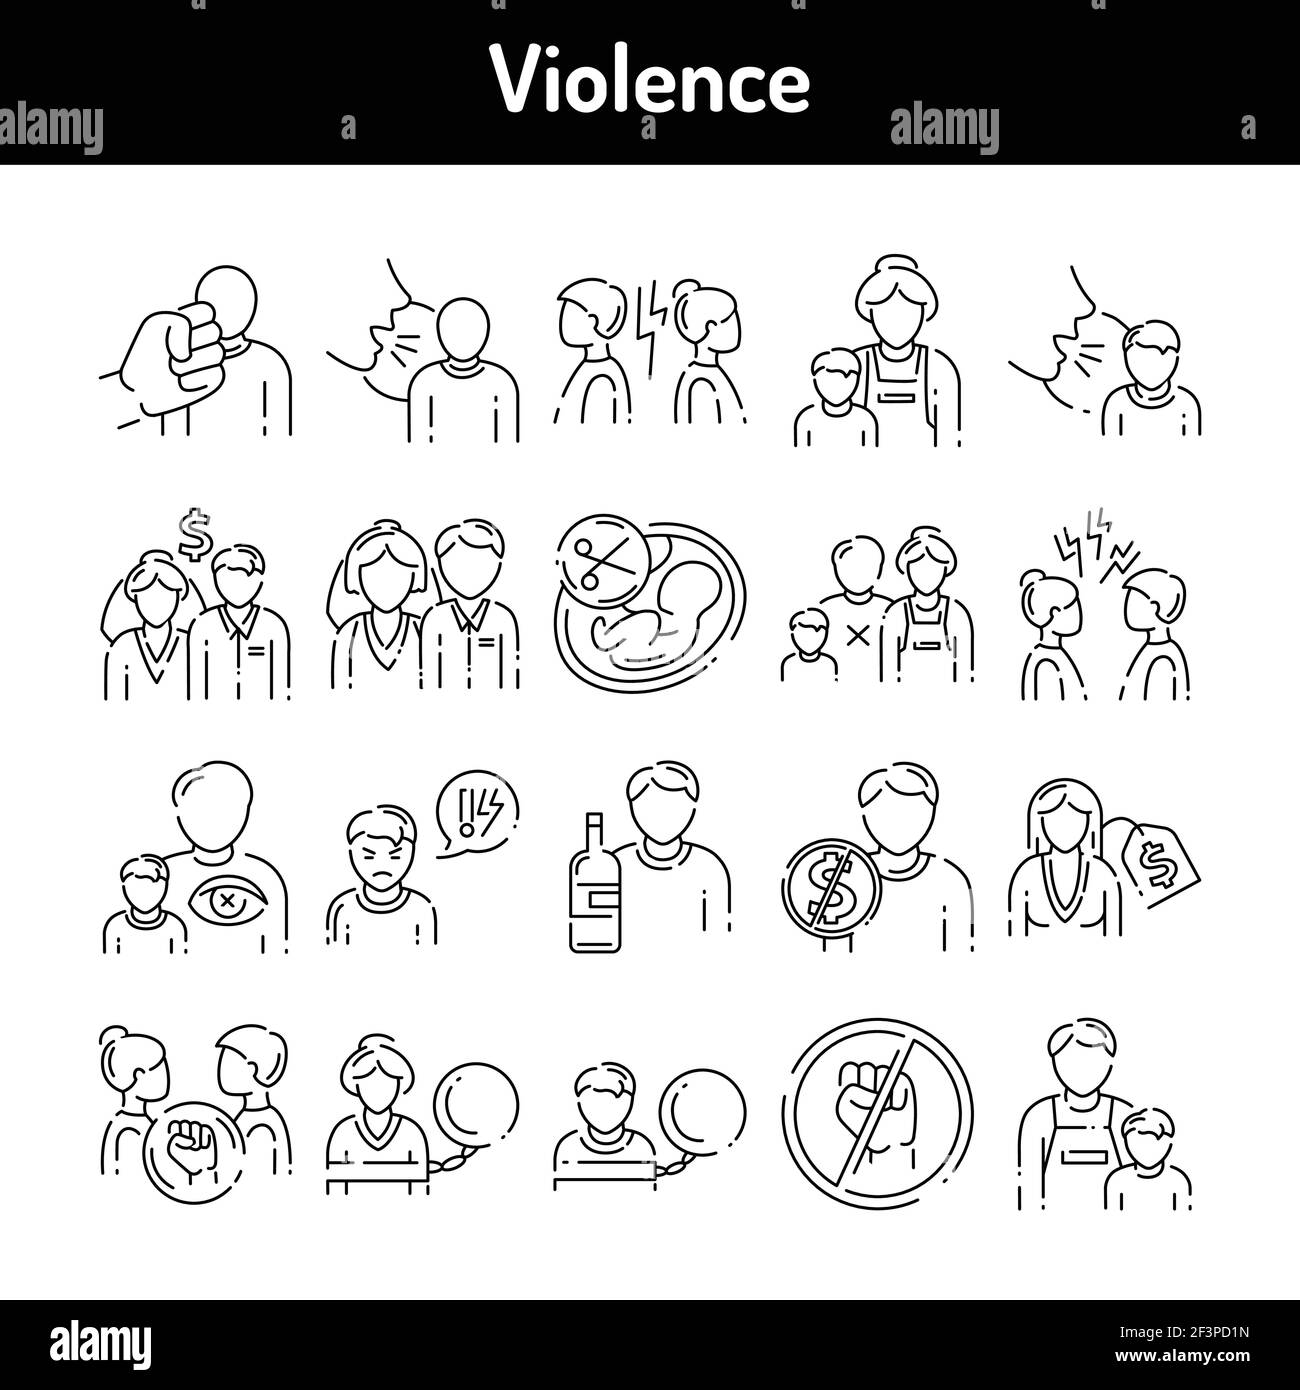 Violence color line icons set. Harassment, family abuse and bullying. Pictograms for web page, mobile app, promo. UI UX GUI design element. Editable s Stock Vector